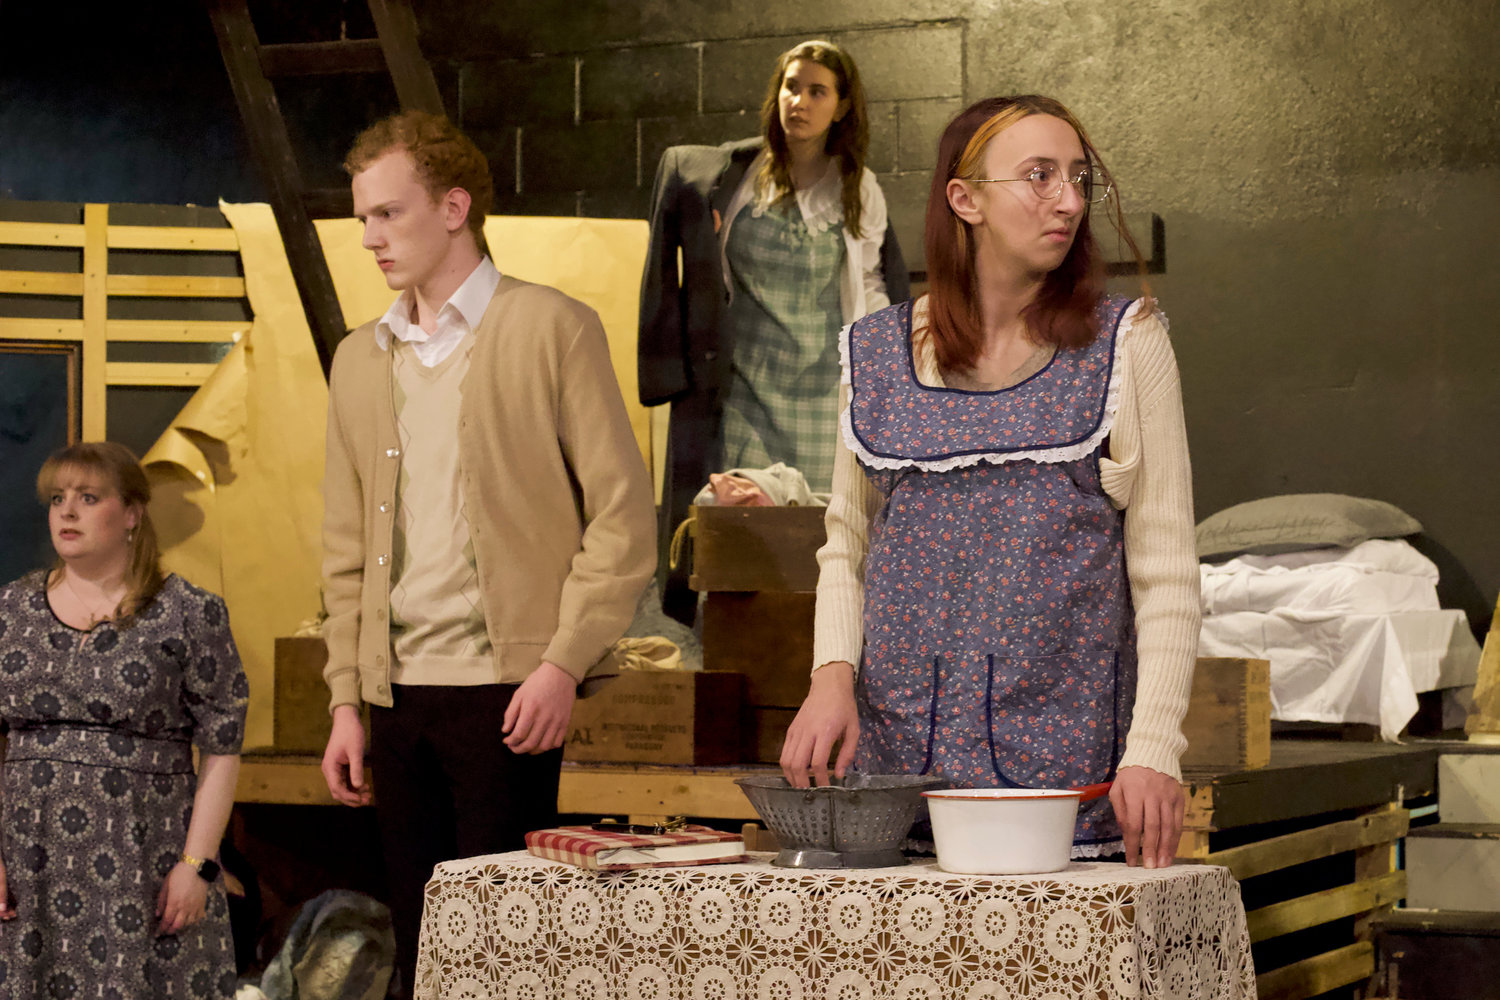 Residents of the Secret Annex react to a siren during a rehearsal of “The Diary of Anne Frank” at the Evergreen Playhouse in Centralia last week. From left is Emilie Brown as Mrs. Van Dann, Nathan Crummett as Peter Van Daan, Ruby Stanton as Anne Frank and Lizzie Conner as Margot Frank.